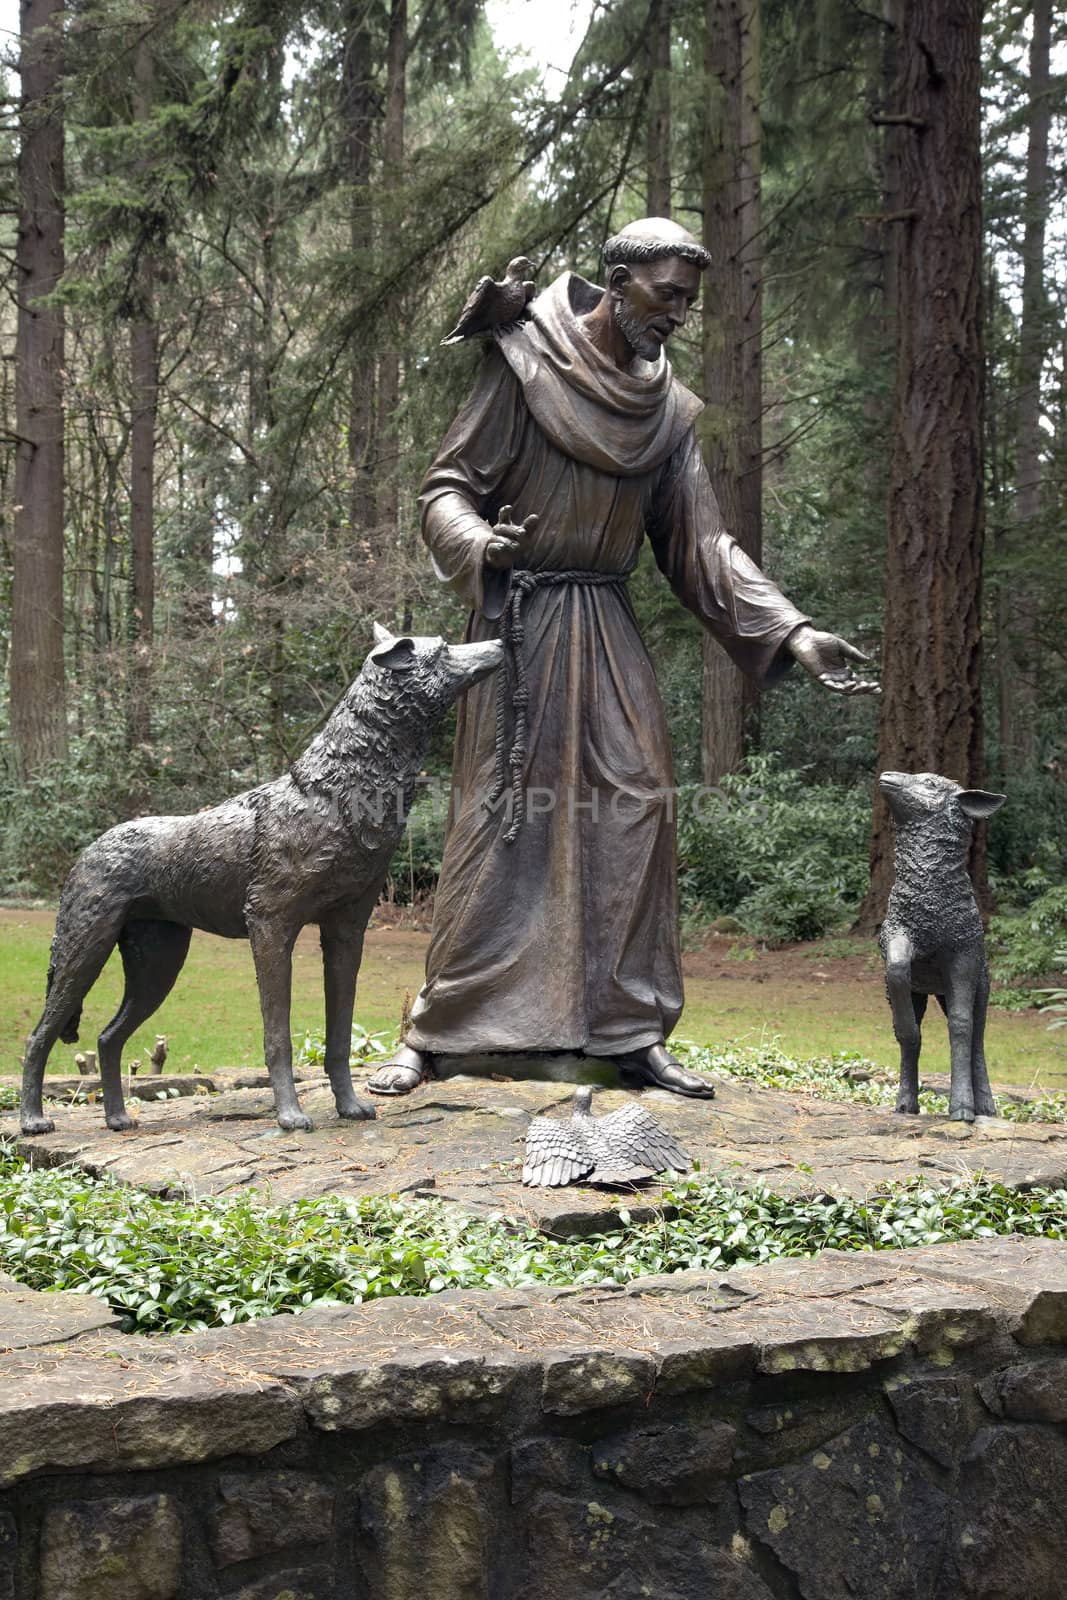 Statue of St. Francis of Assisi in the Grotto park, Portland Oregon.